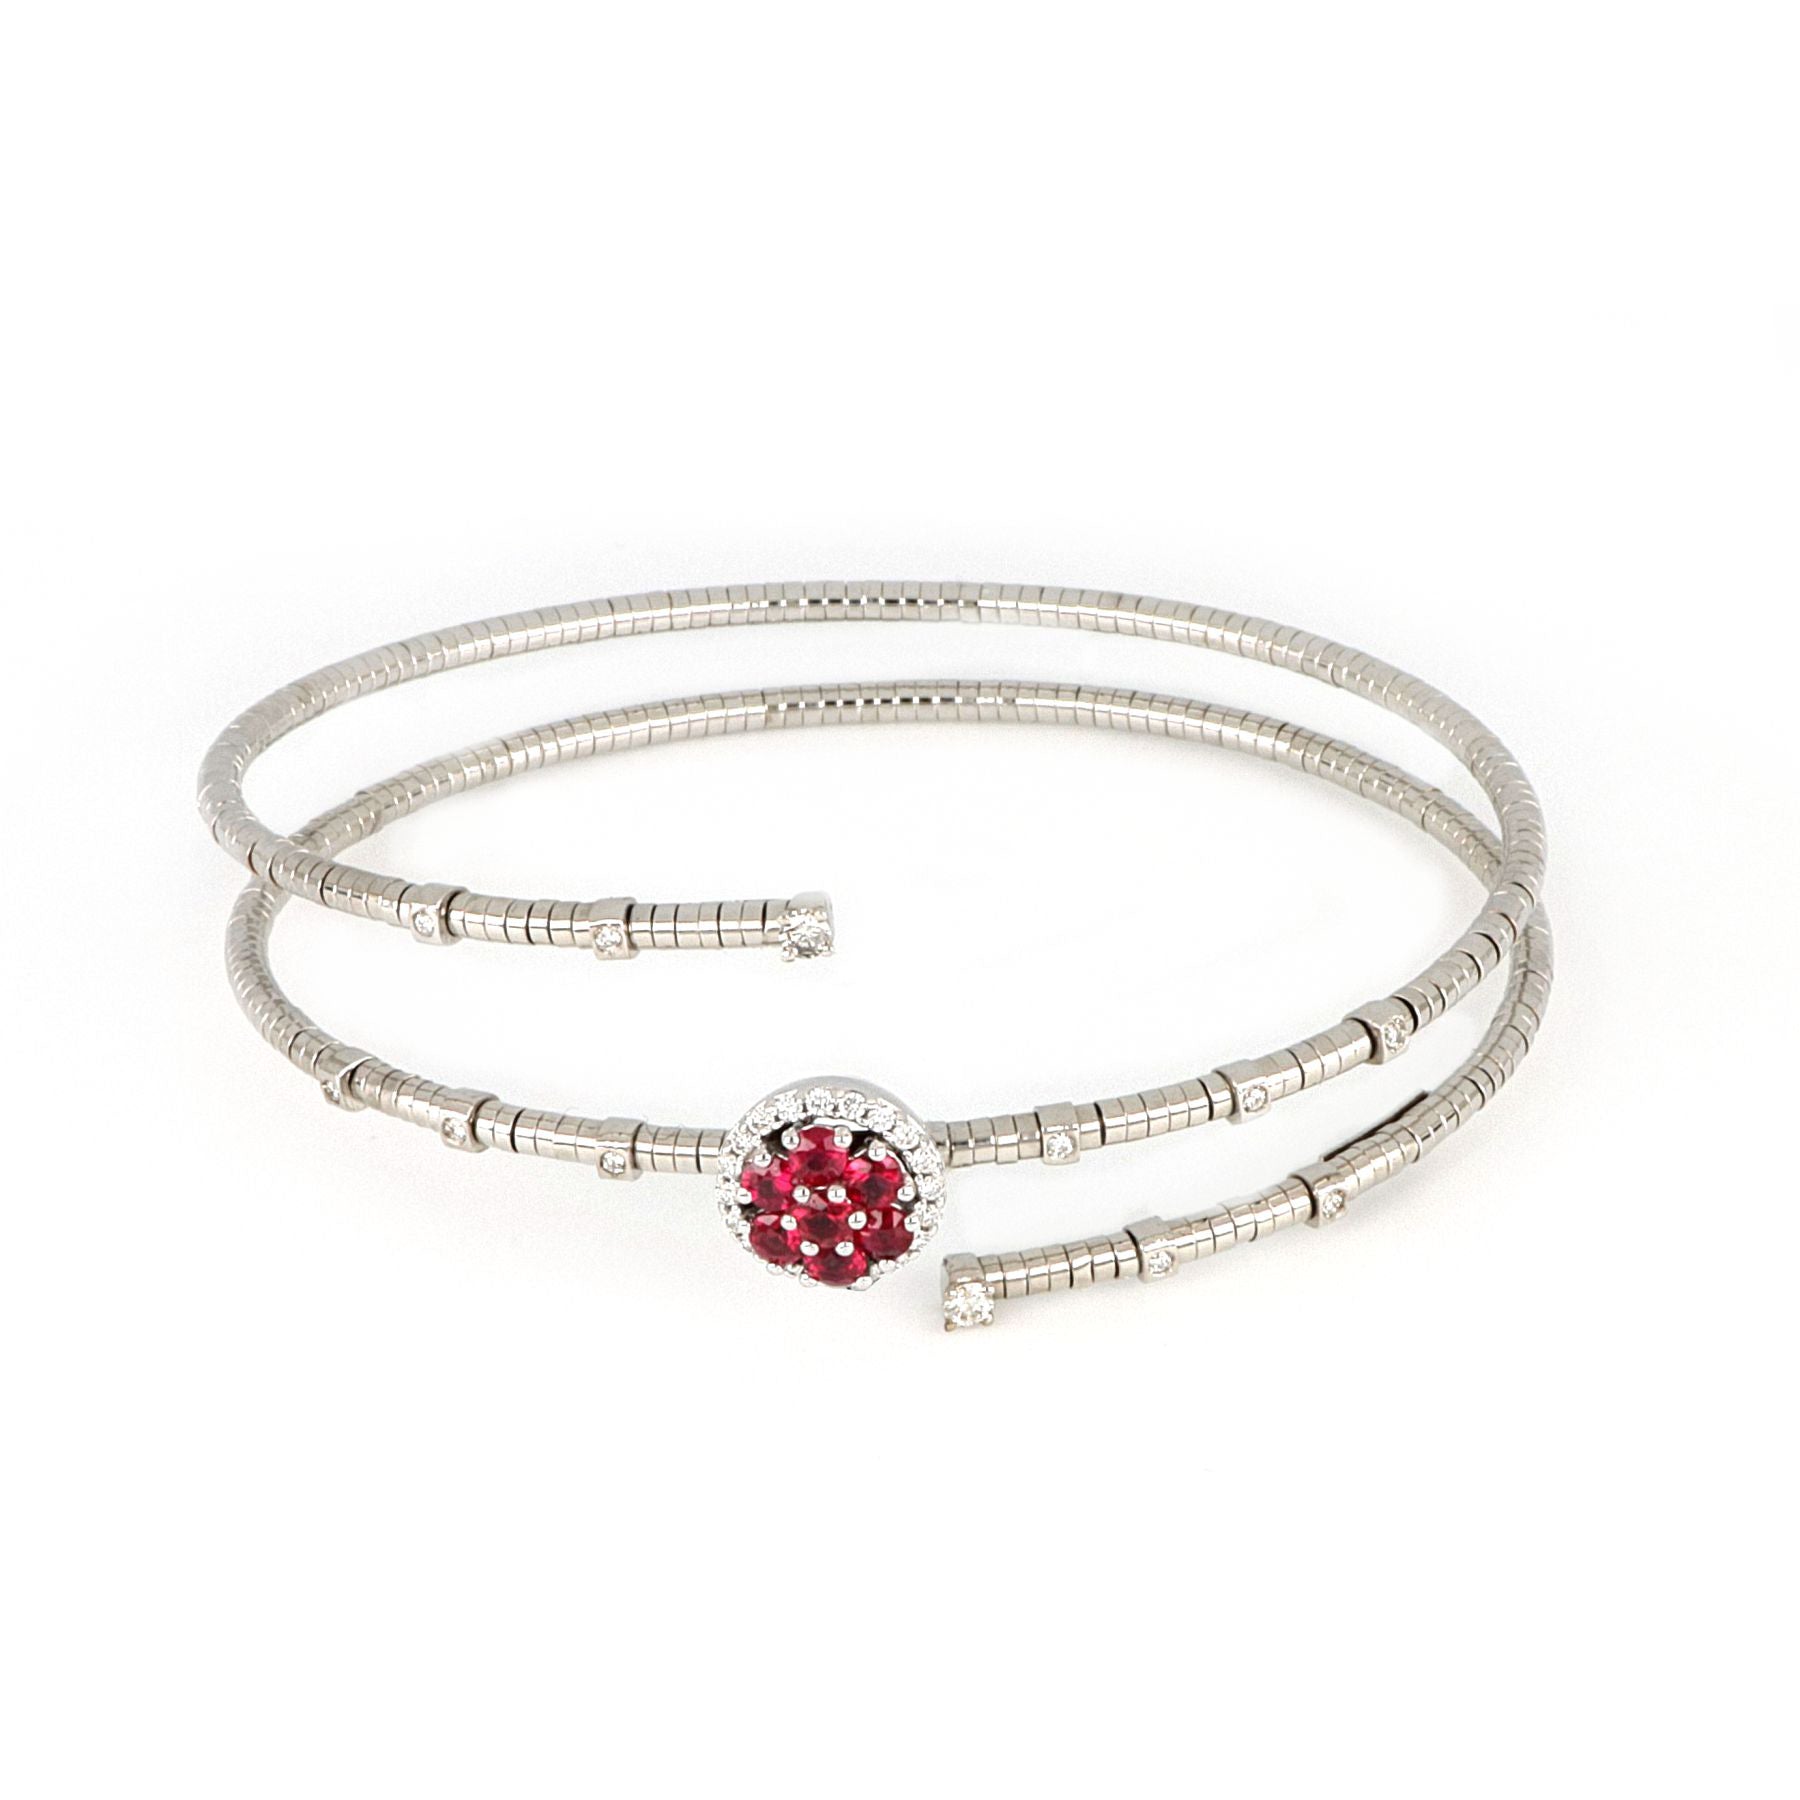 White Gold Bracelet With Rubies And Diamonds